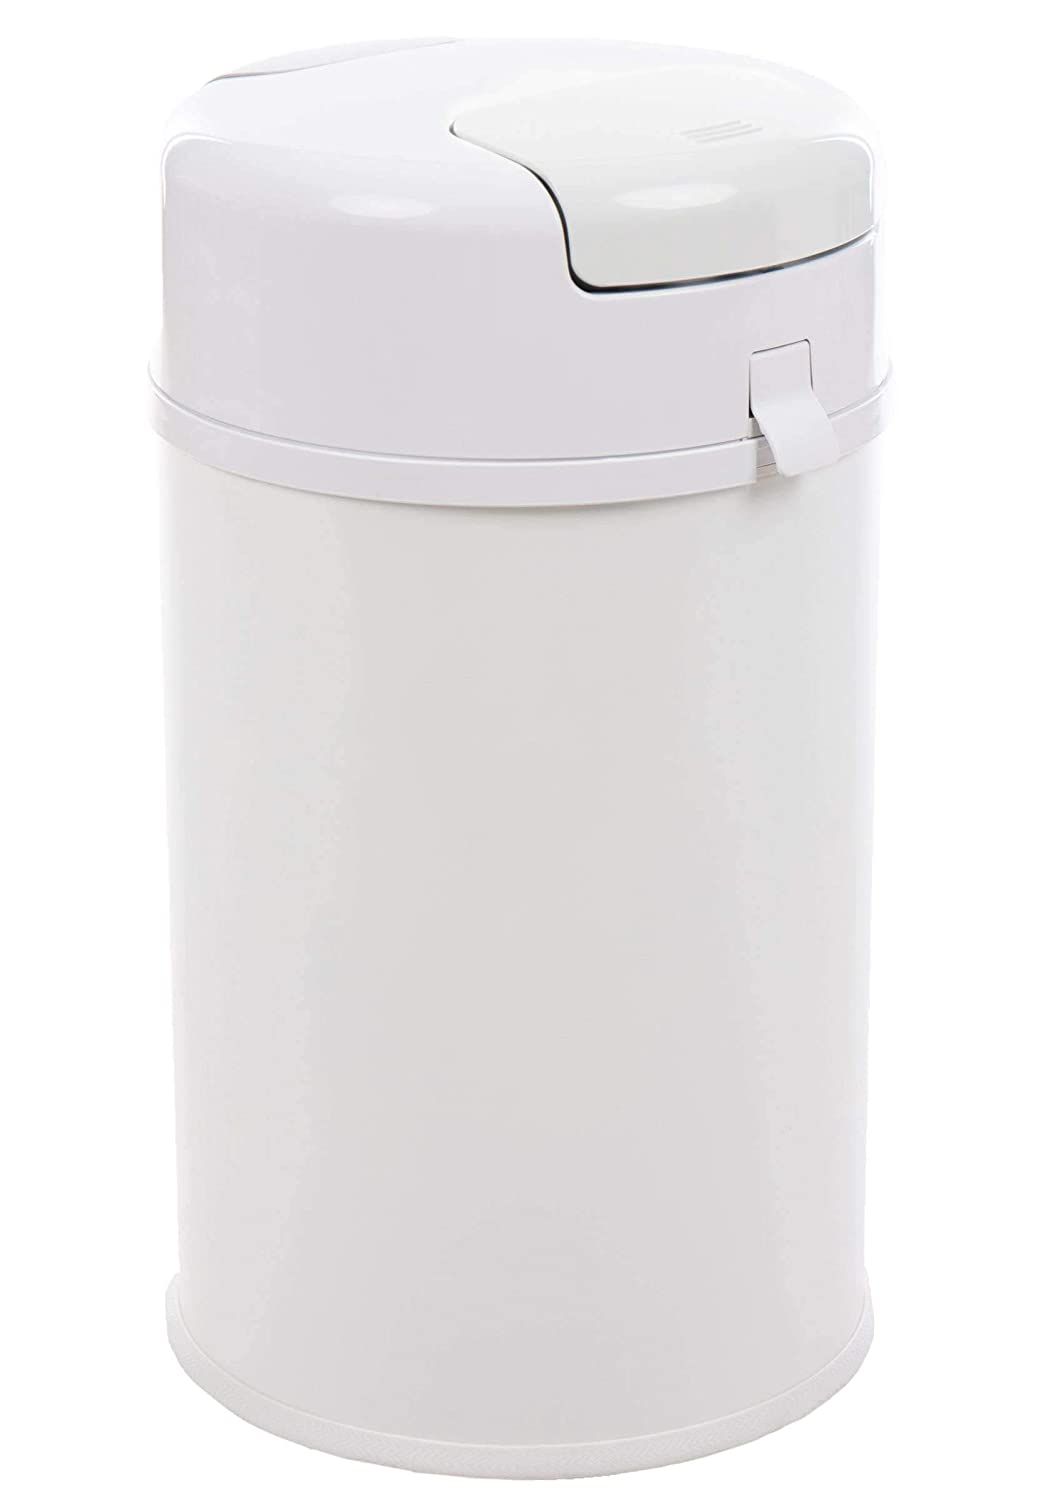 Fillikid Nappy Bin X-Large Exclusive Odourless Extra Large 35 L Metal White with Seal for Normal Bin Bags No Expensive Refill Cassettes